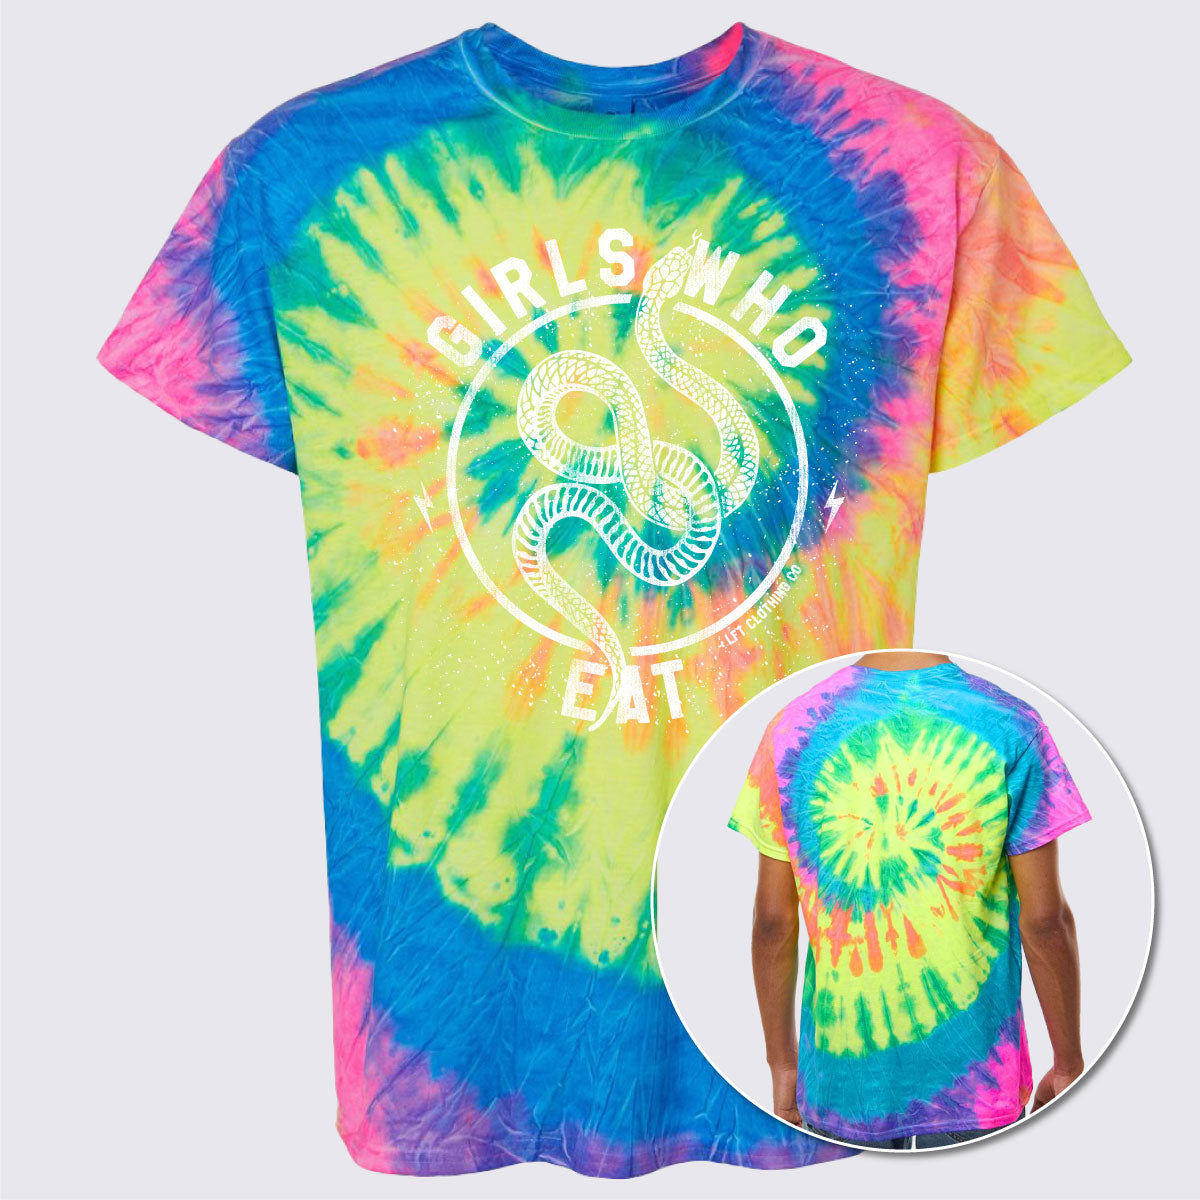 Girls Who Eat Multi-Color Tie-Dyed T-Shirt - The LFT Clothing Company